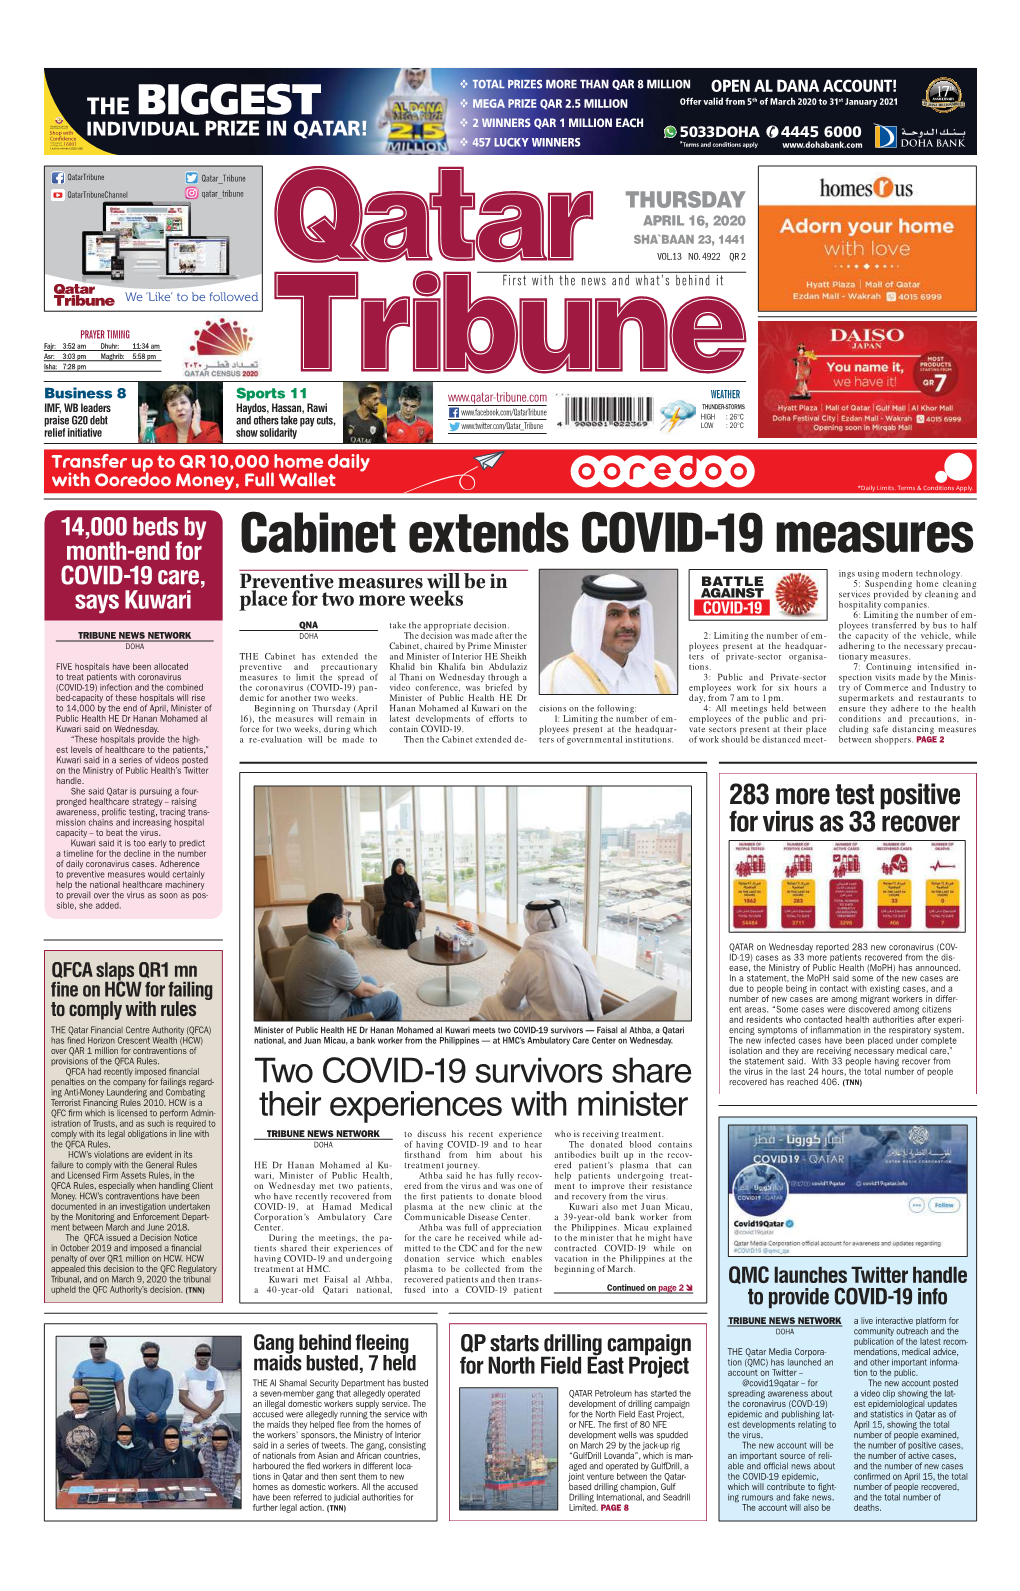 Cabinet Extends COVID-19 Measures Ings Using Modern Technology